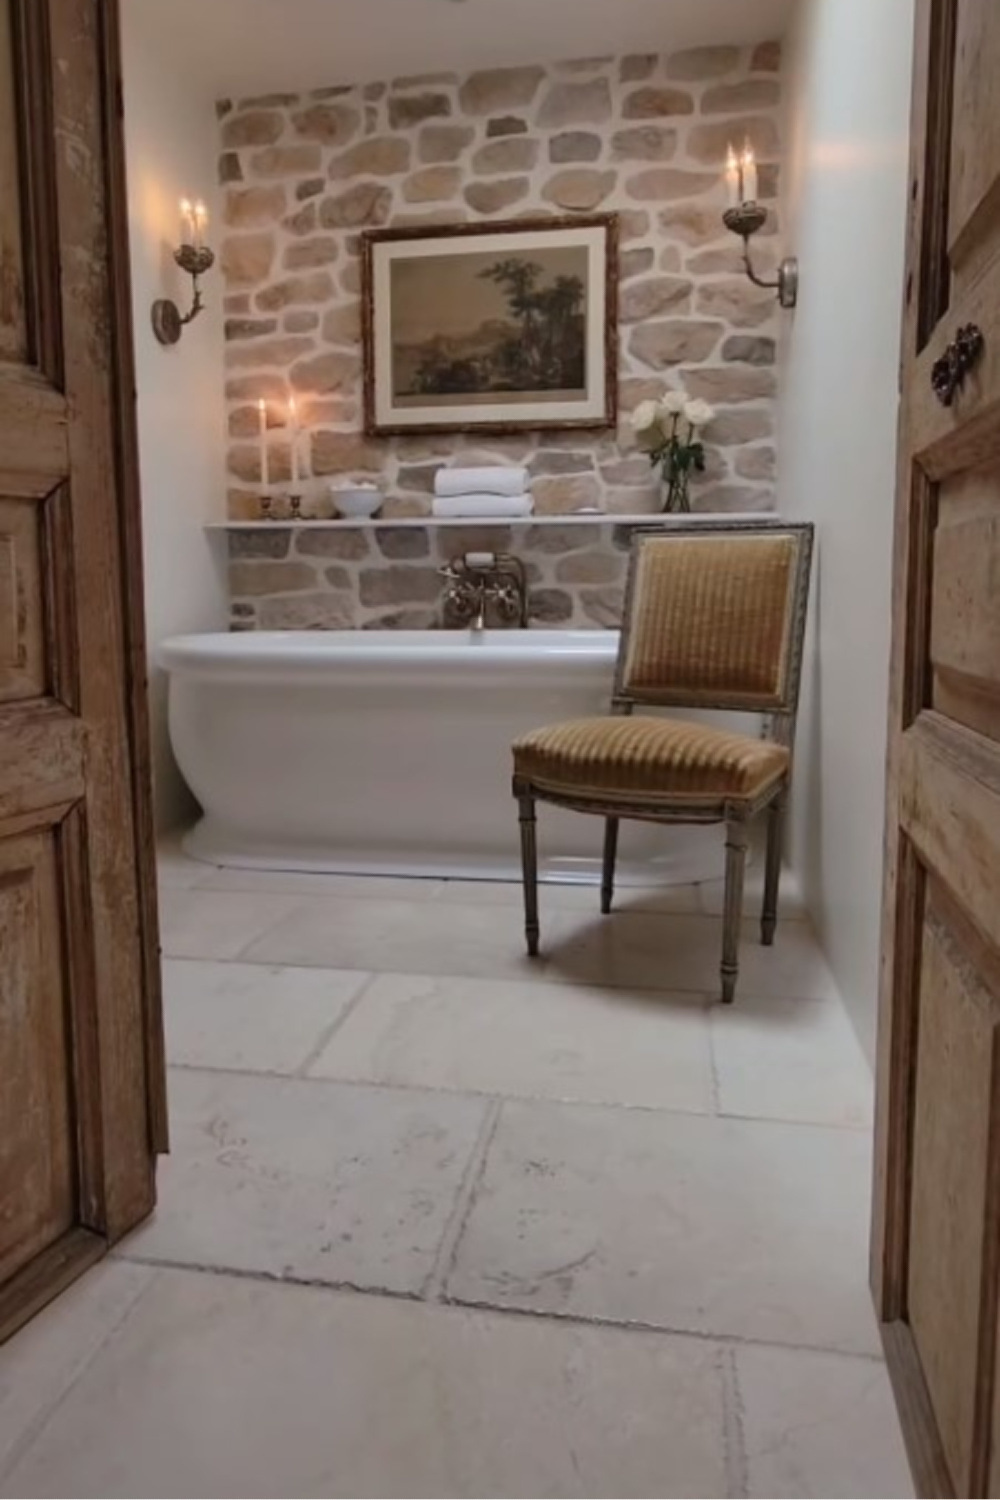 French country bath with stone accent walls, shelf, candles, and luxurious design by @thefrenchnestcointeriordesign. #frenchcountrybath #oldworldstyle